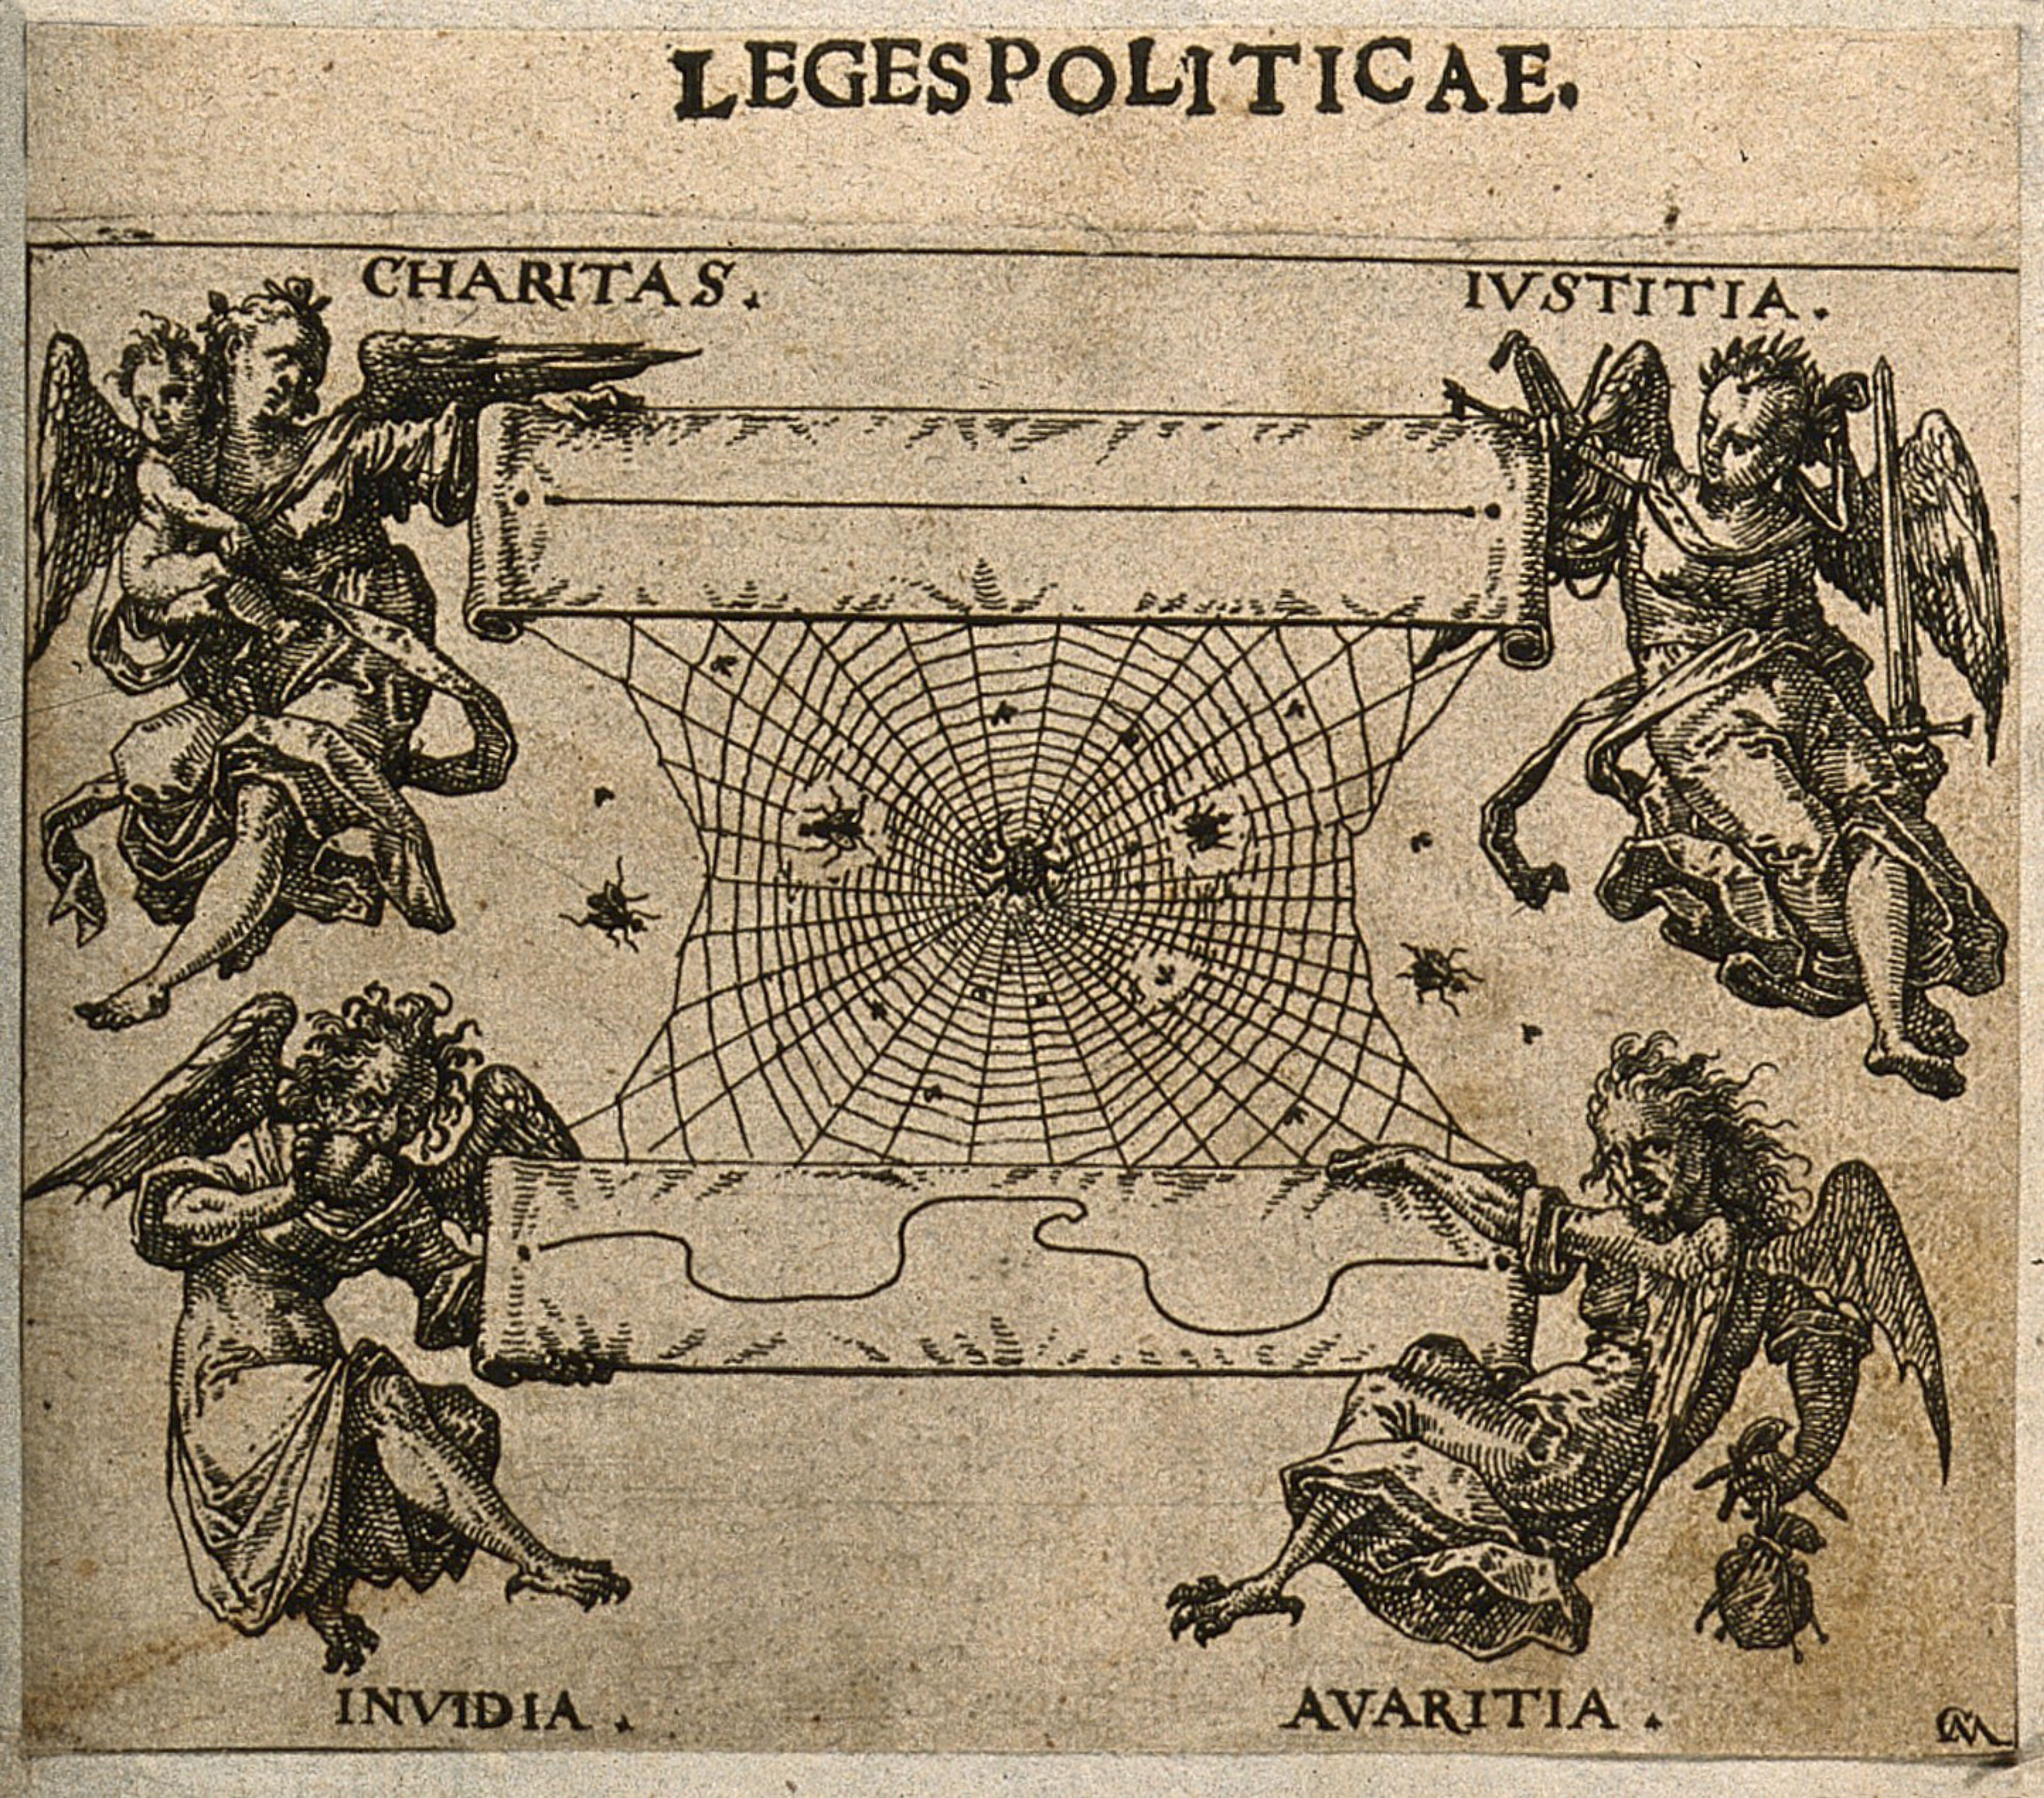 Allegorical figures hold up two scrolls, separated by a spider's web: one shows a straight line between "Charitas" and "Iustitia"; the other a crooked line between "Invidia" and "Avaritia". Etching by C. Murer after himself, c. 1600-1614.